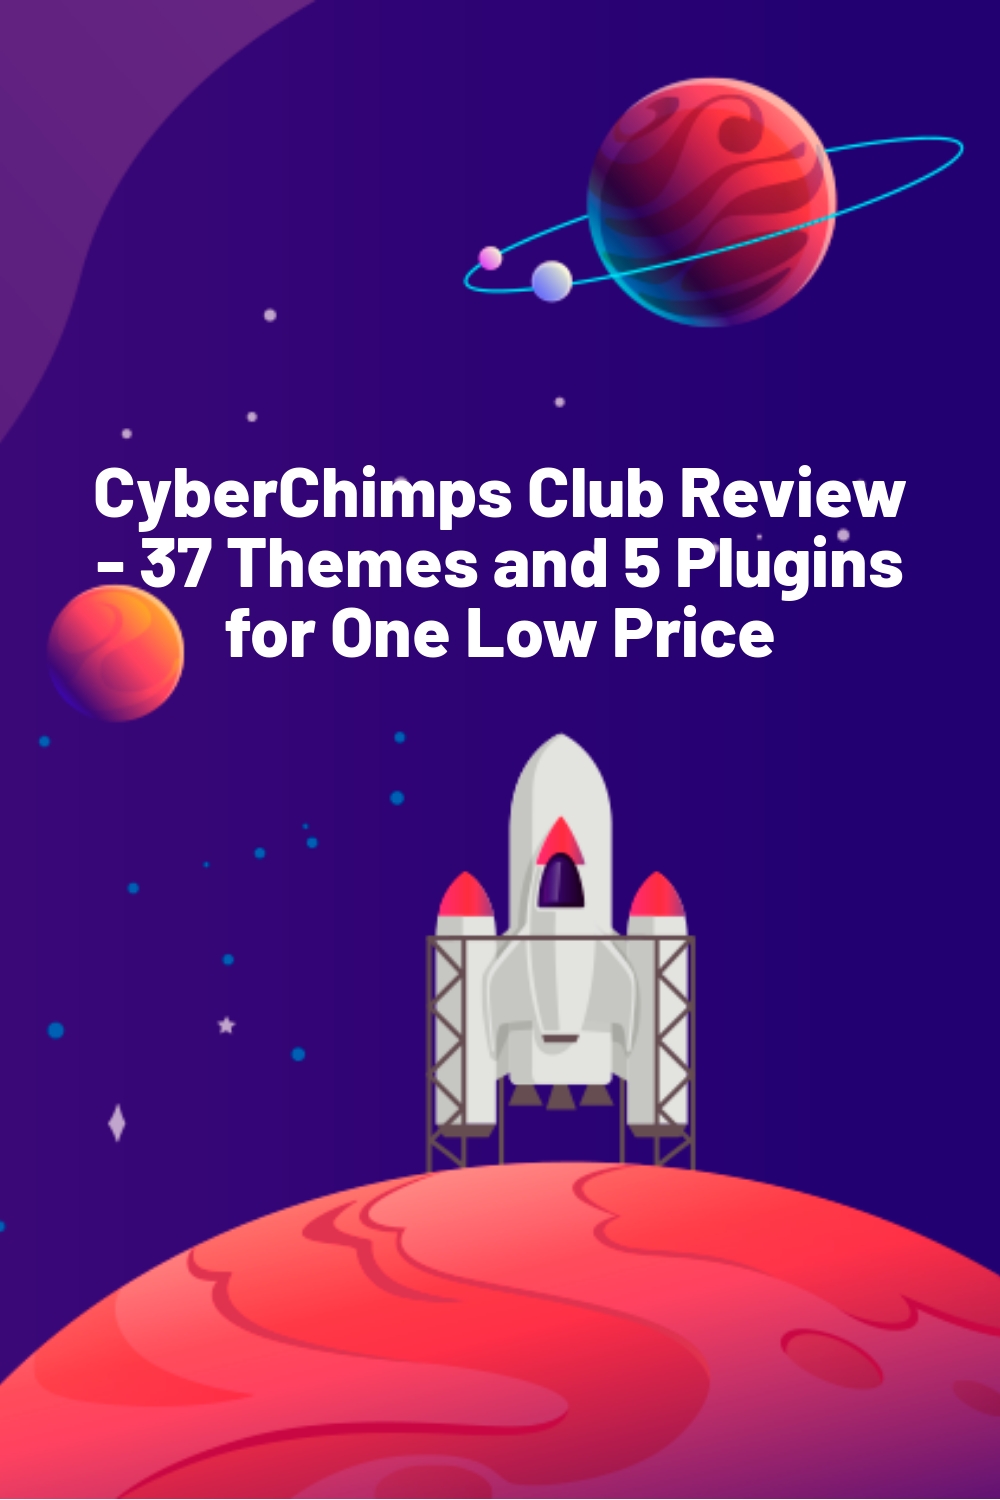 CyberChimps Club Review – 37 Themes and 5 Plugins for One Low Price